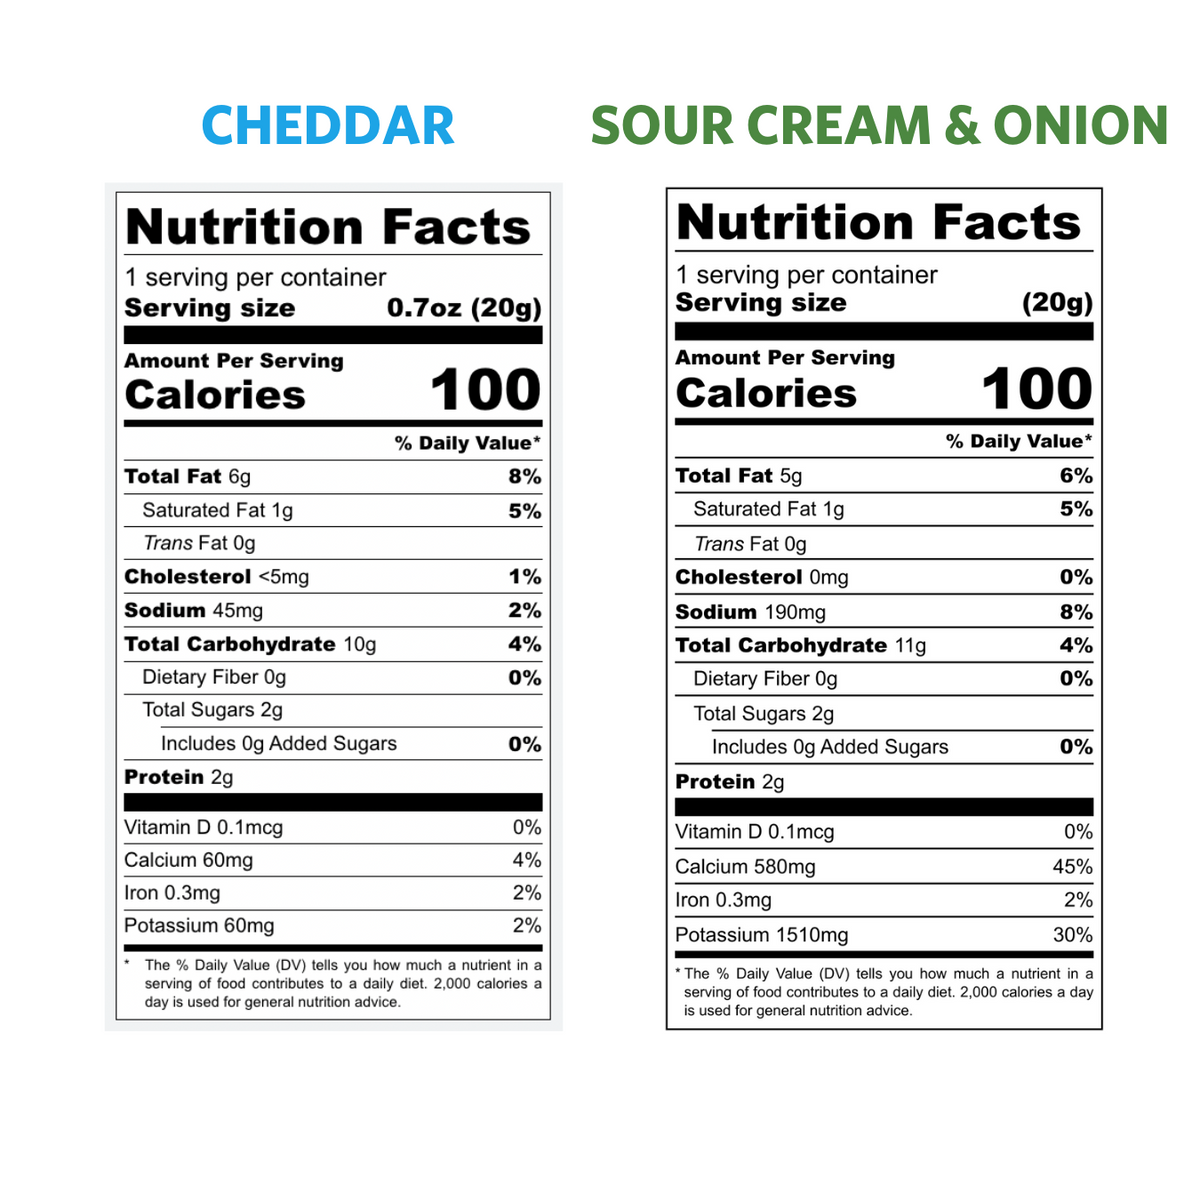 Cheddar Puffs 0.7oz nutrition facts. 1 serving per container, 0.7oz per serving, 100 calories per serving. Sour Cream &amp; Onion Puffs 0.7oz nutrition facts. 1 serving per container, 0.7oz per serving, 100 calories per serving. 